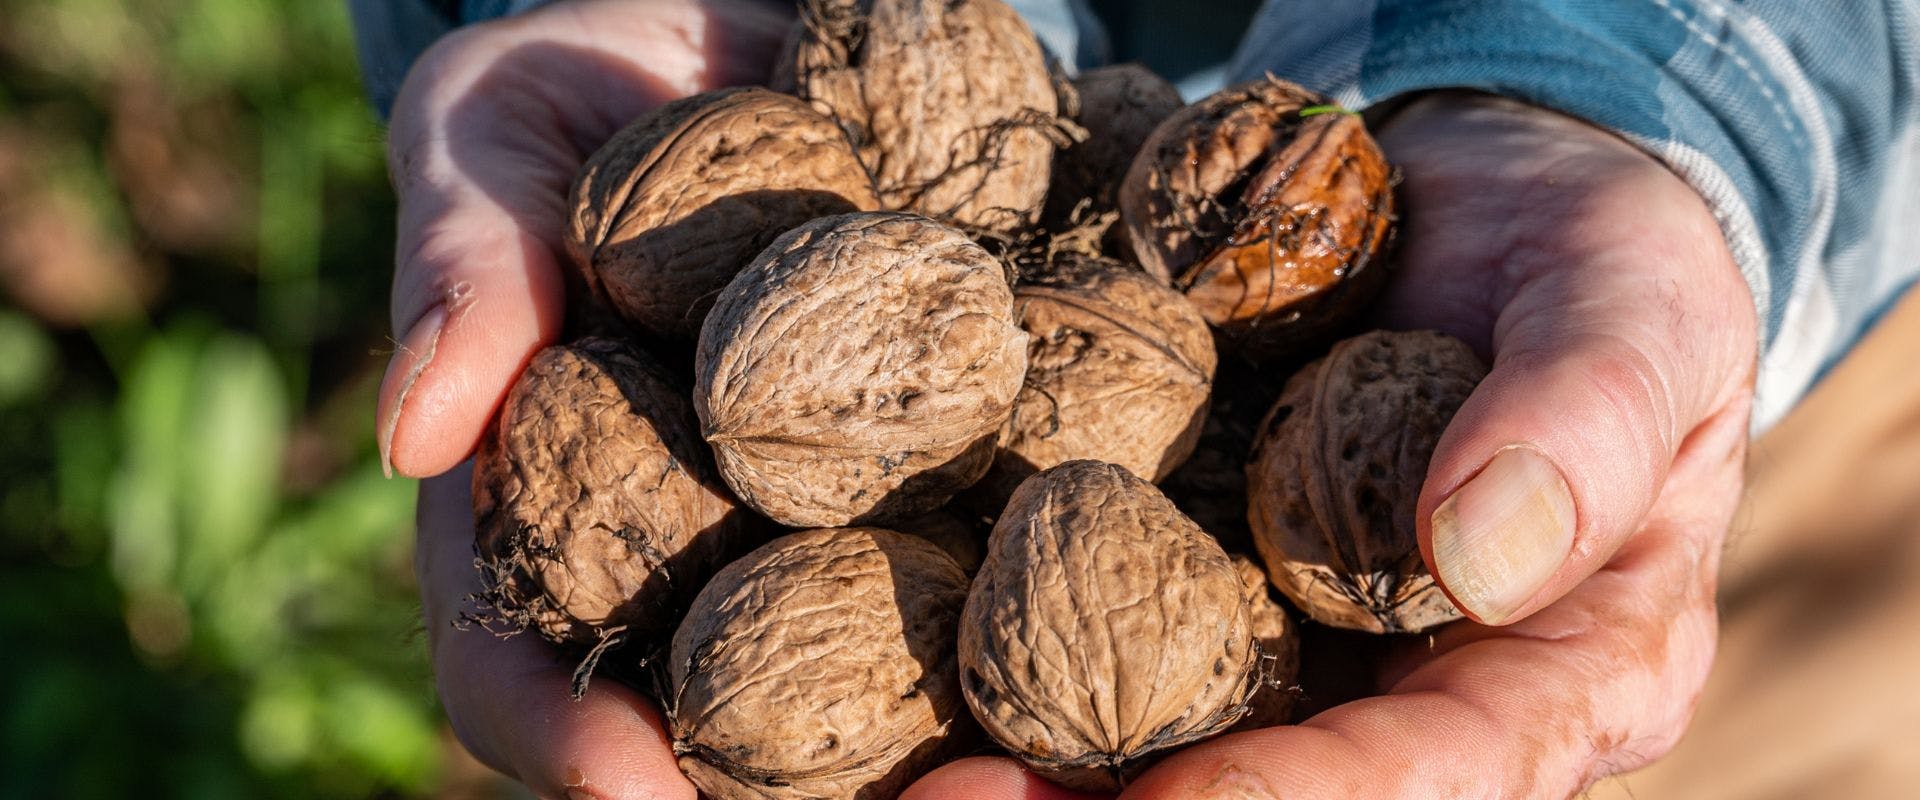 Person holding freshly-harvested walnuts